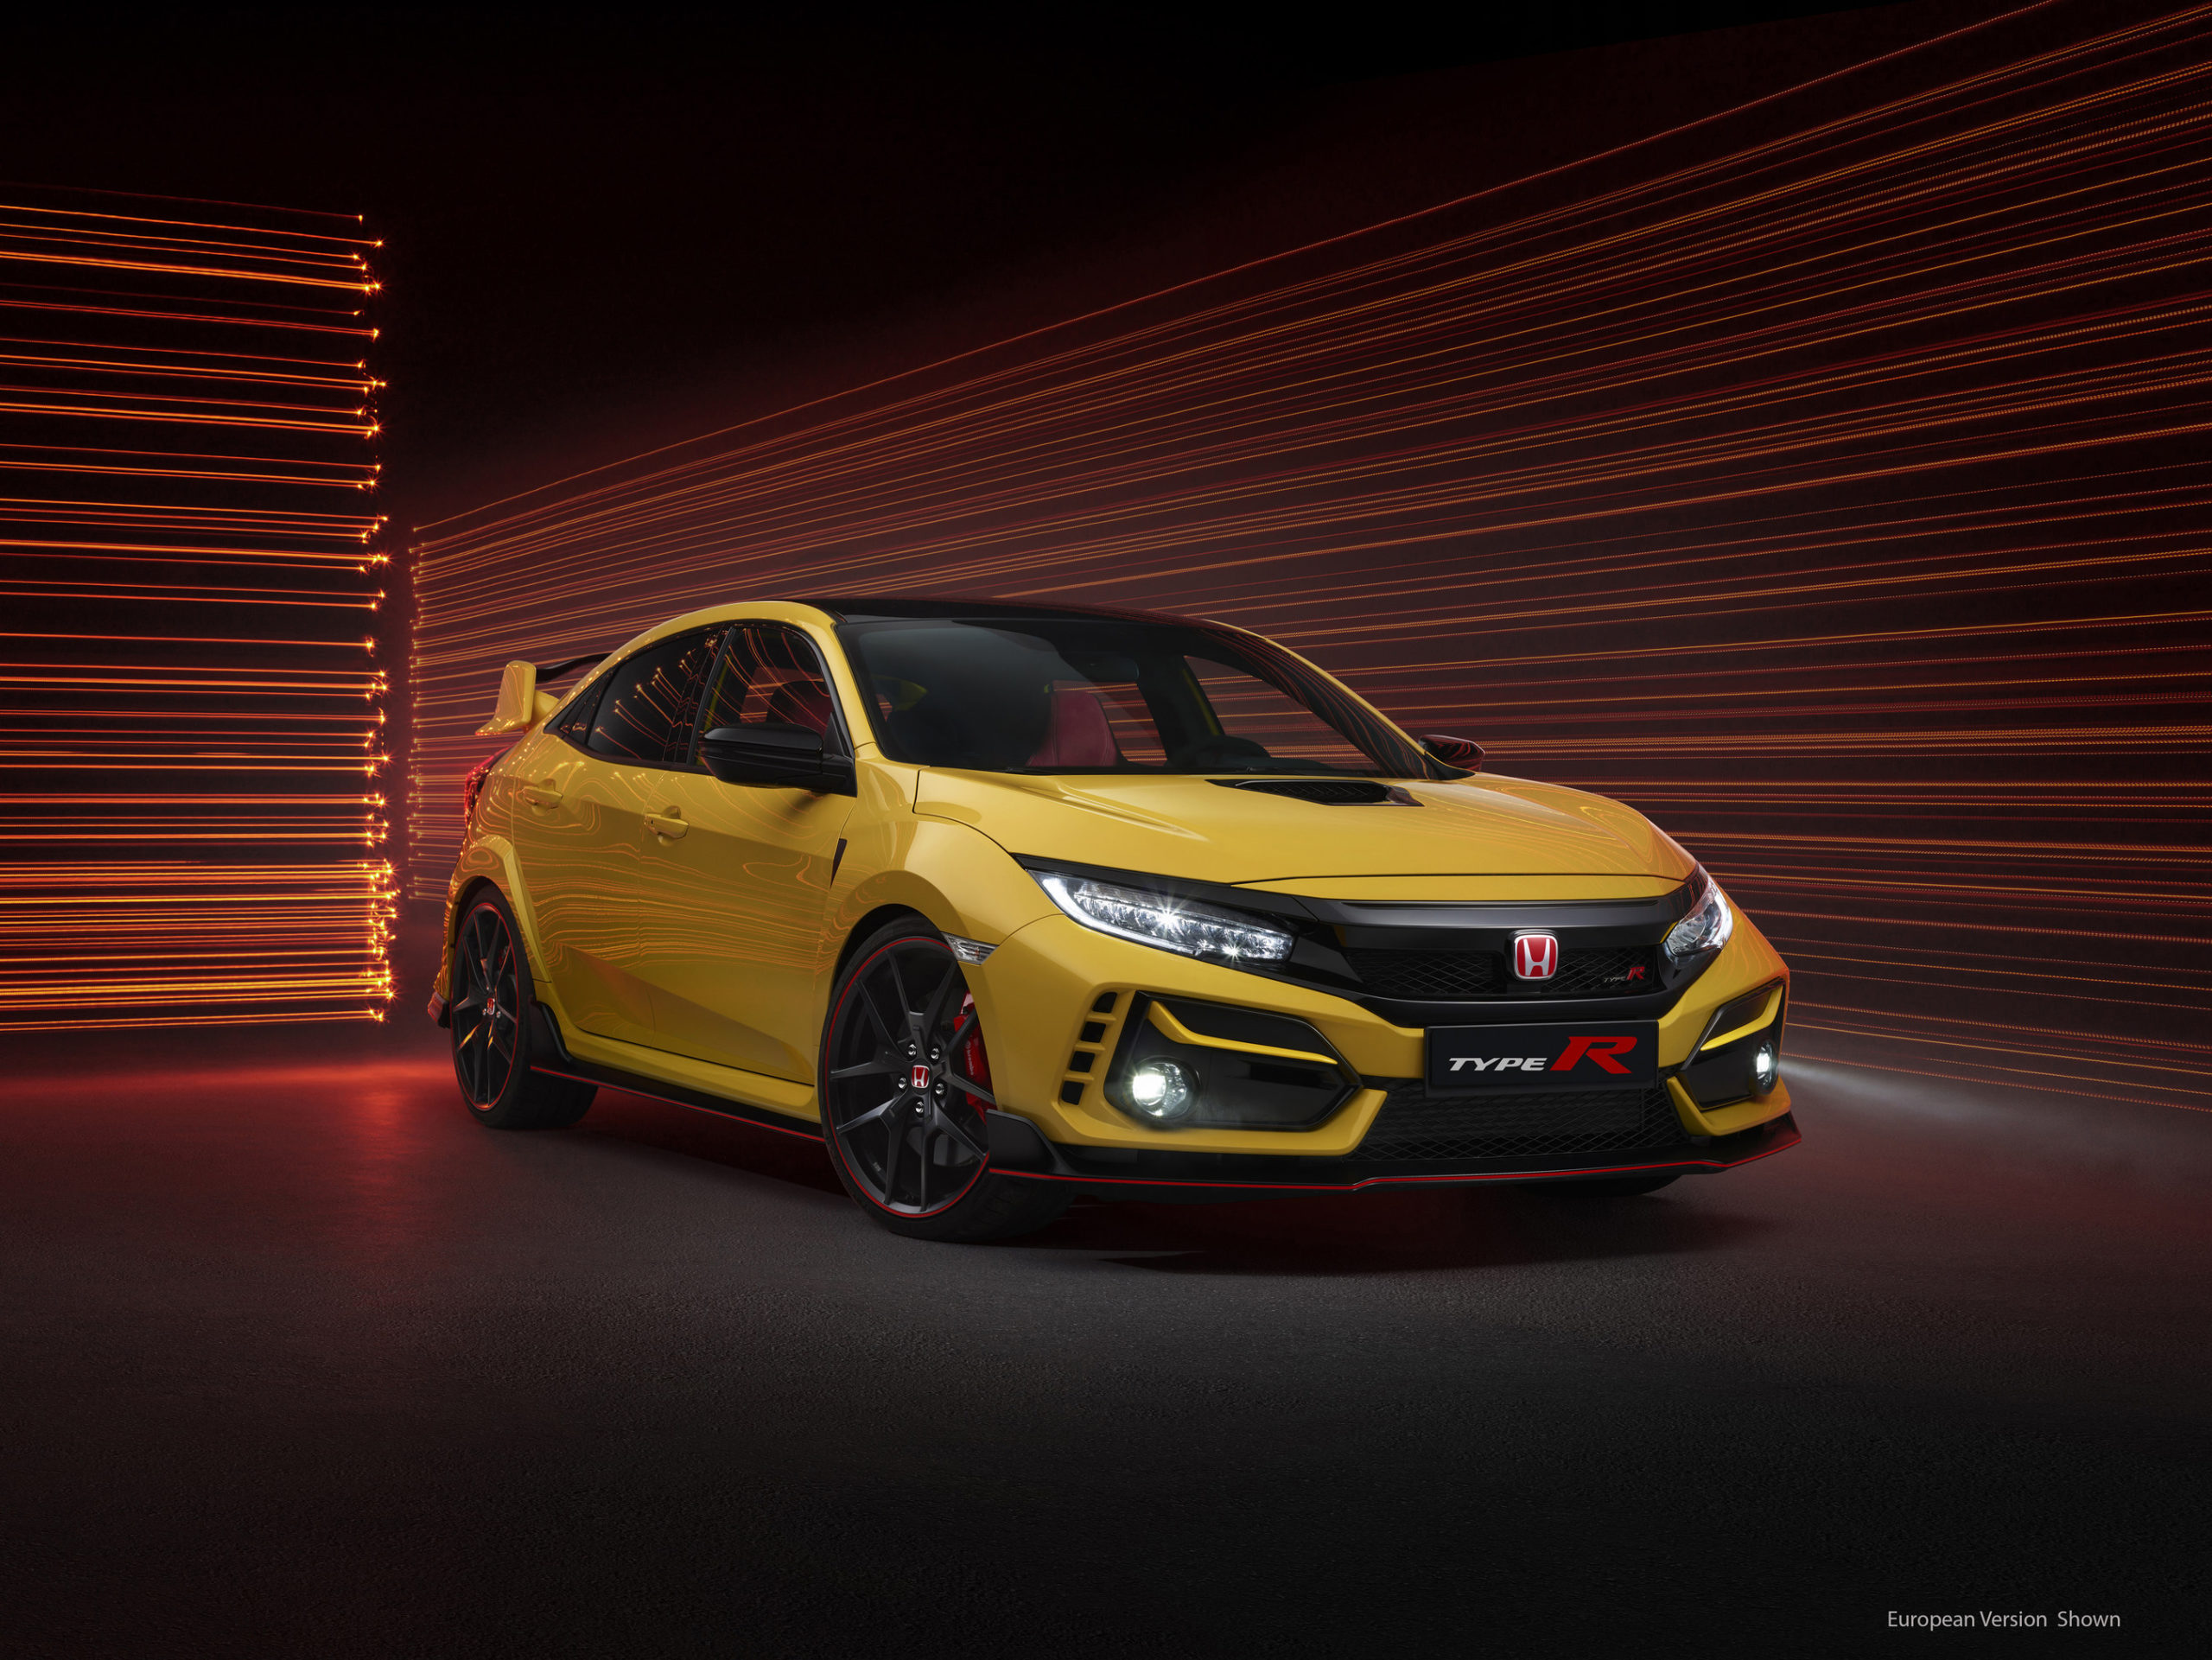 Honda Rolls Out Civic Type R Limited Edition | THE SHOP